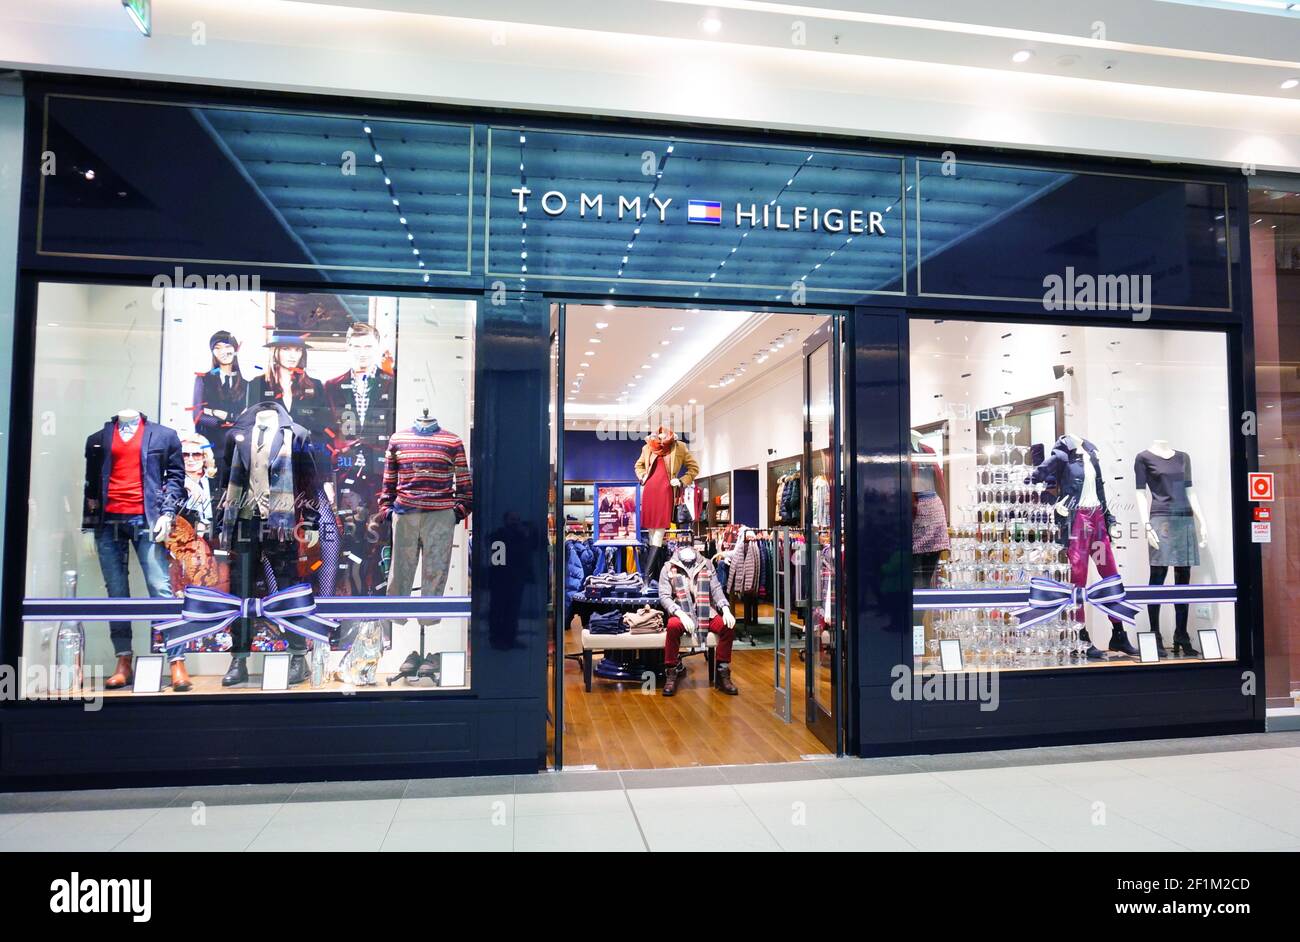 POZNAN, POLAND - Apr 08, 2016: Entrance to a Tommy Hilfiger clothing store  in the Galeria Malta shopping mall Stock Photo - Alamy